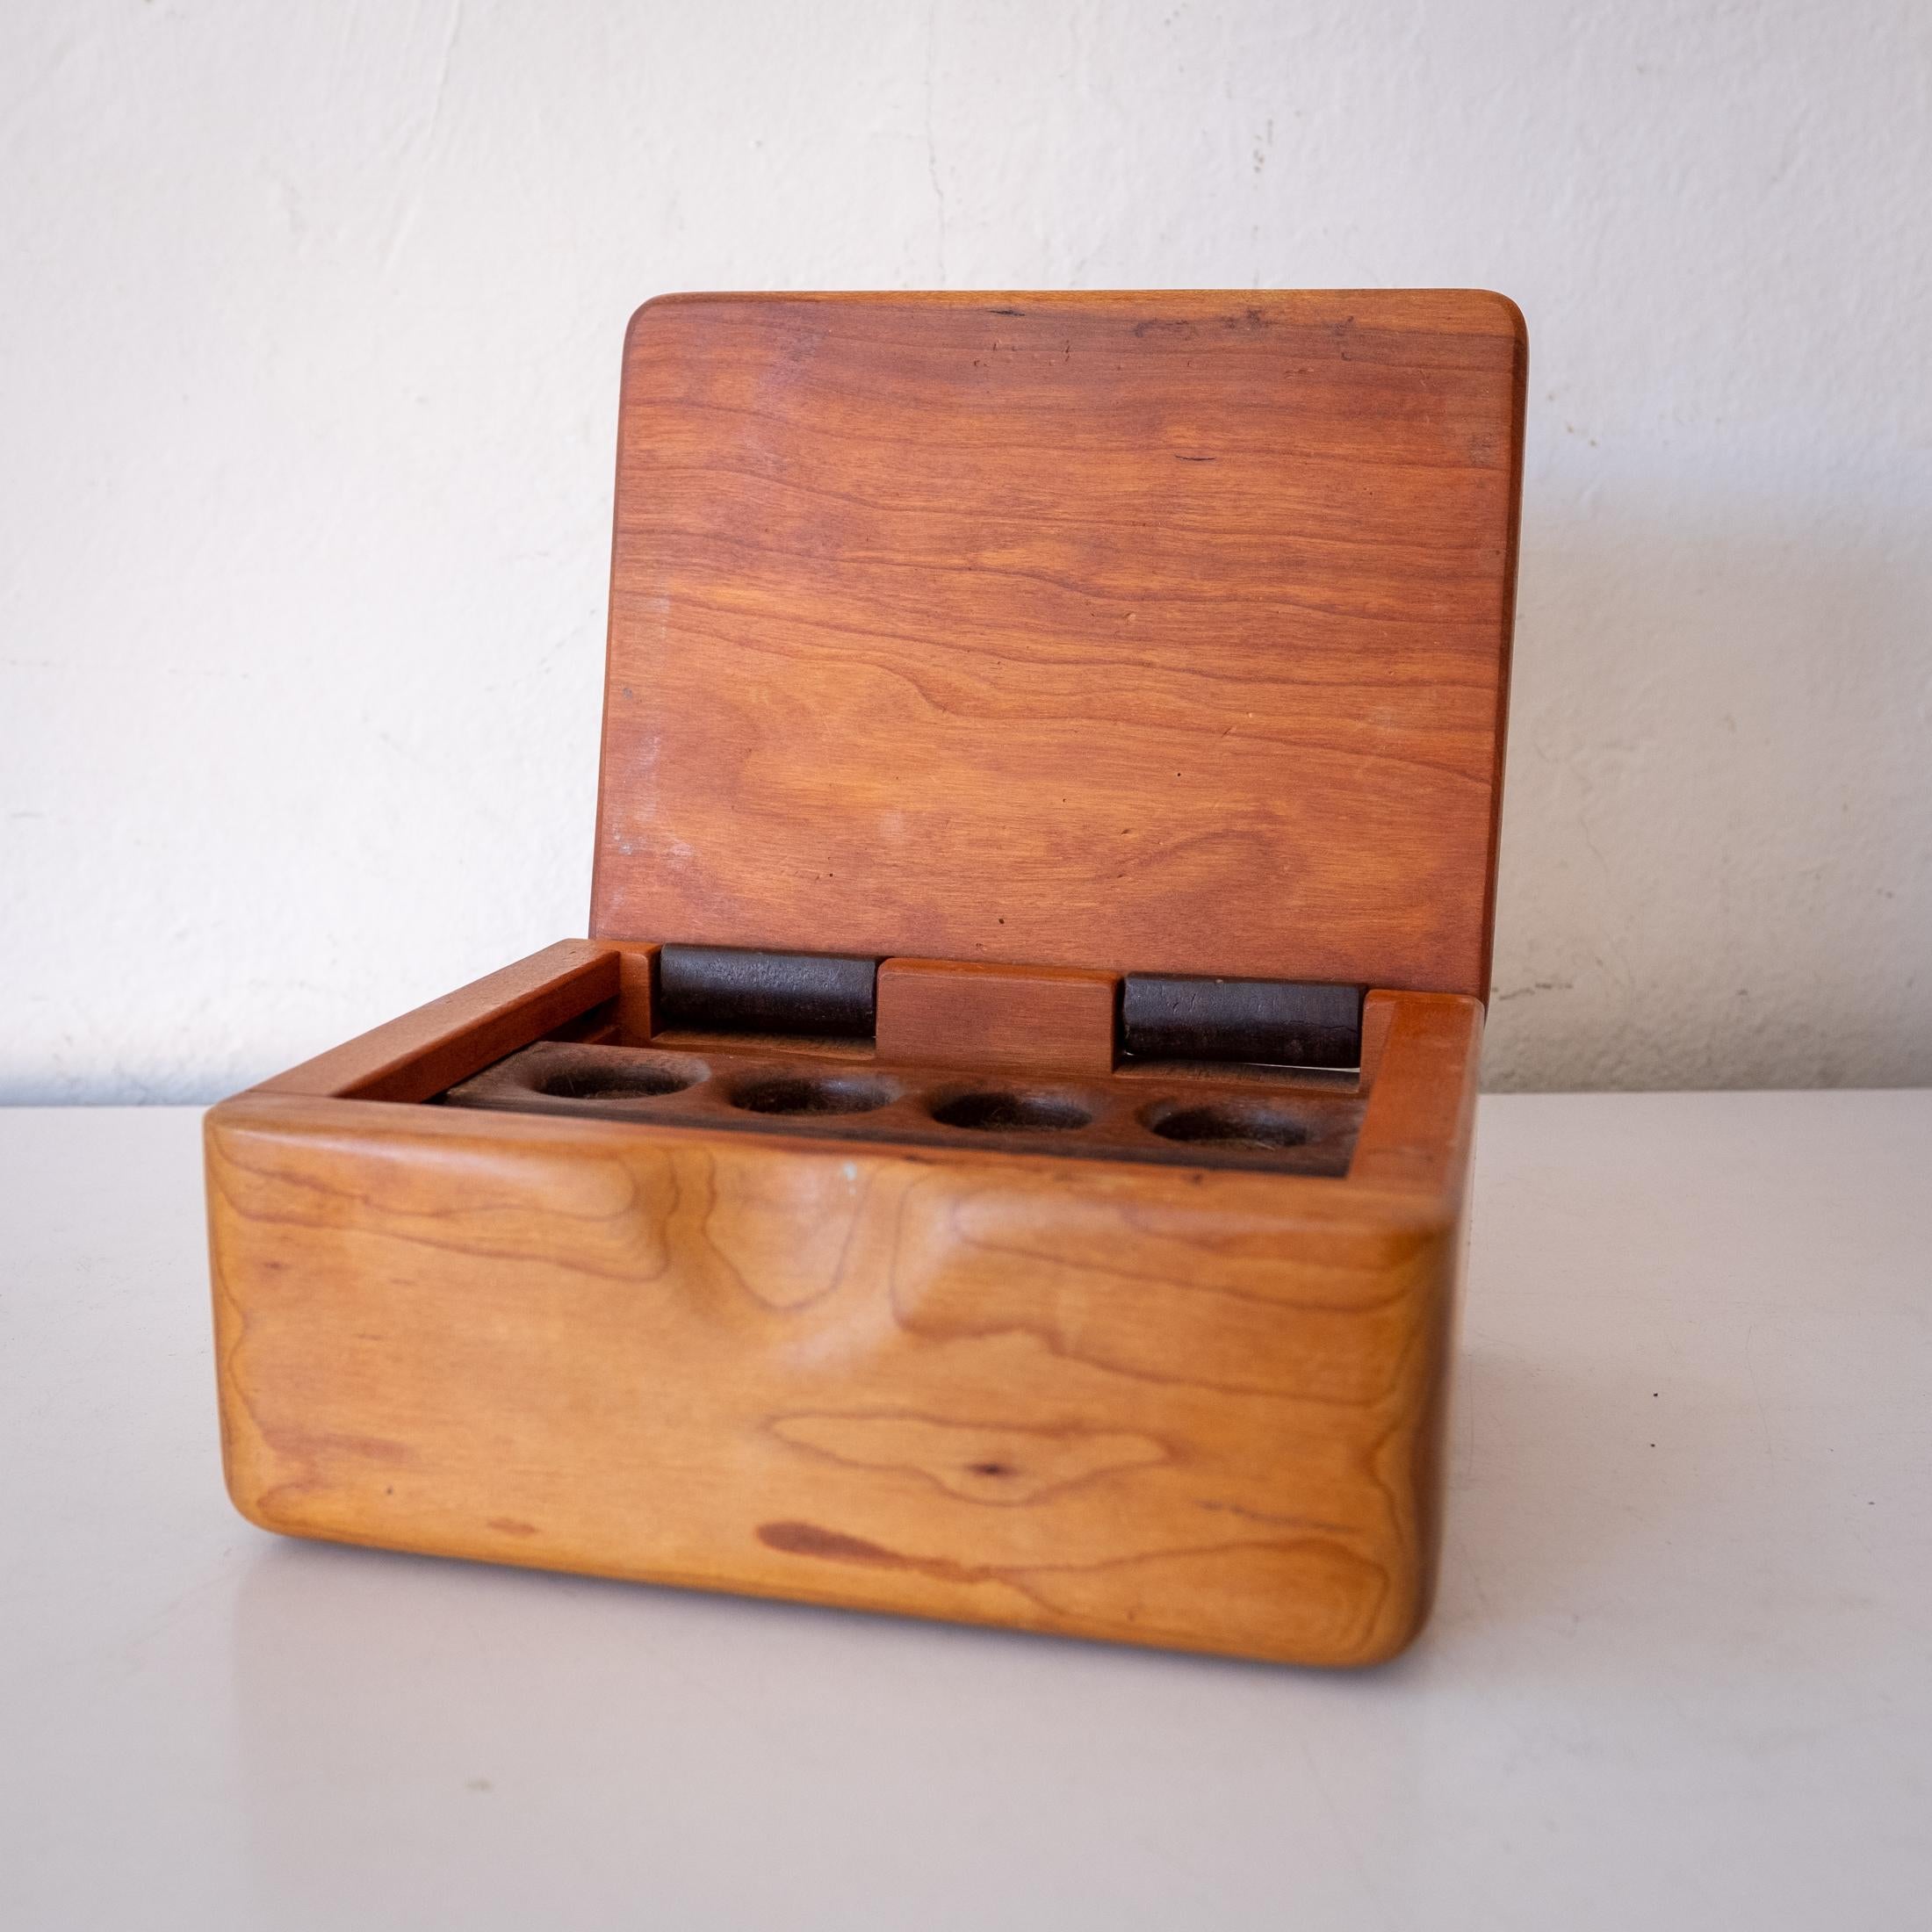 Handcrafted wood jewelry or trinket box from the 1970s. Felt lined with a sliding ring holder. Nice joinery and mix of woods. 